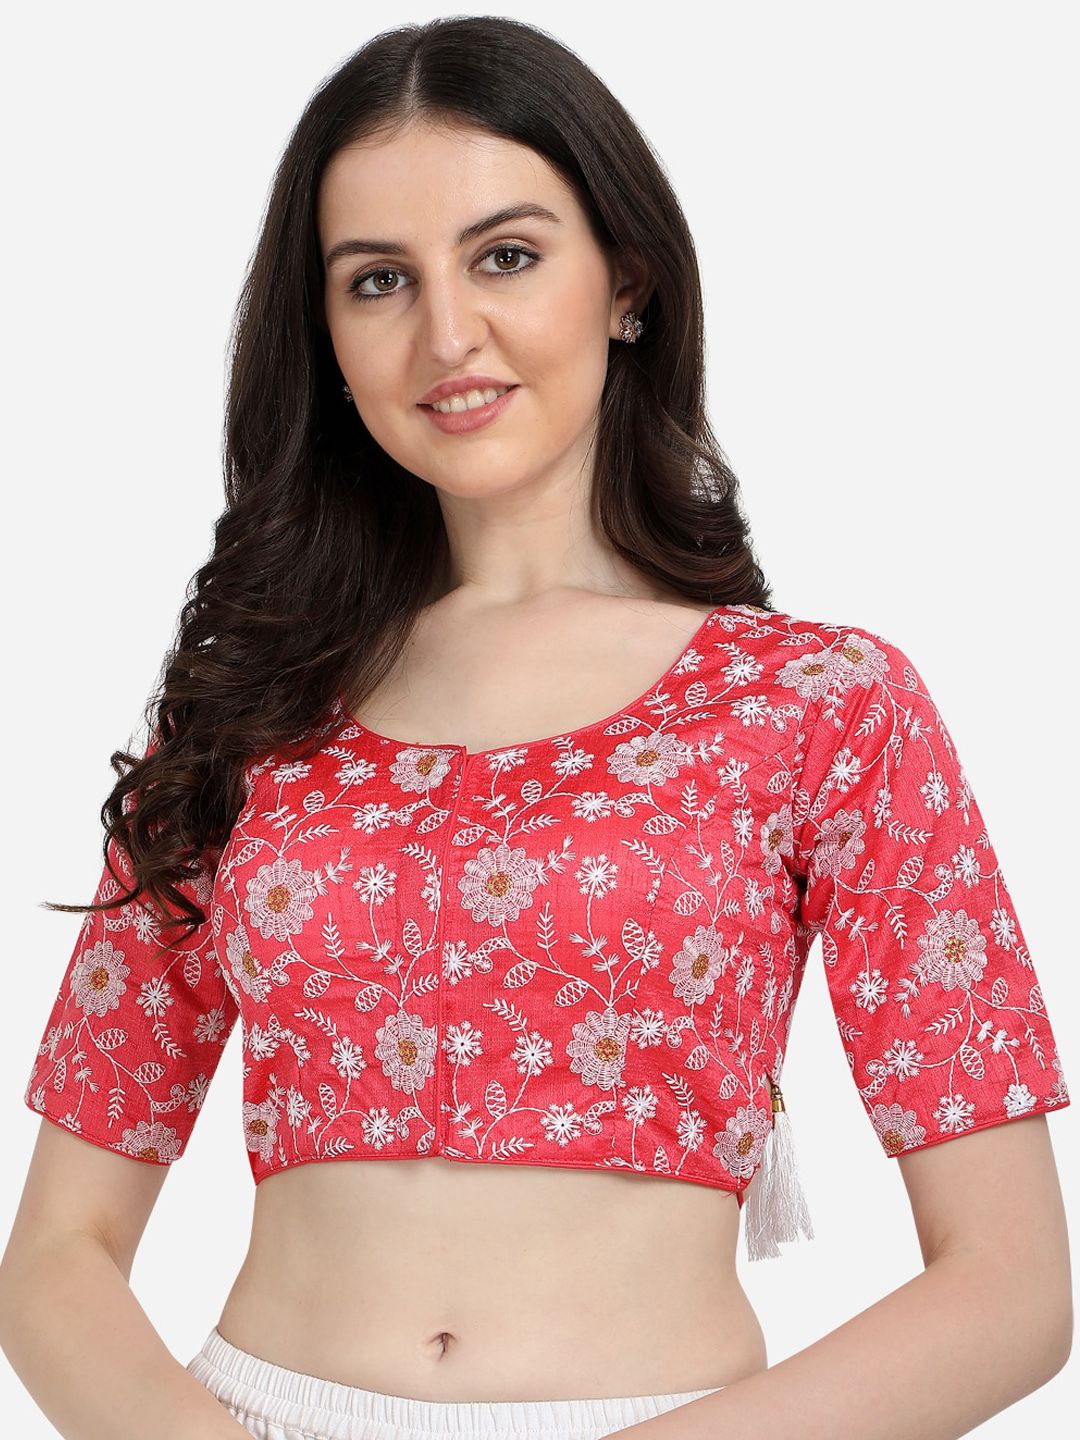 Fab Dadu Women Peach & Silver Embroidered Saree Blouse Price in India